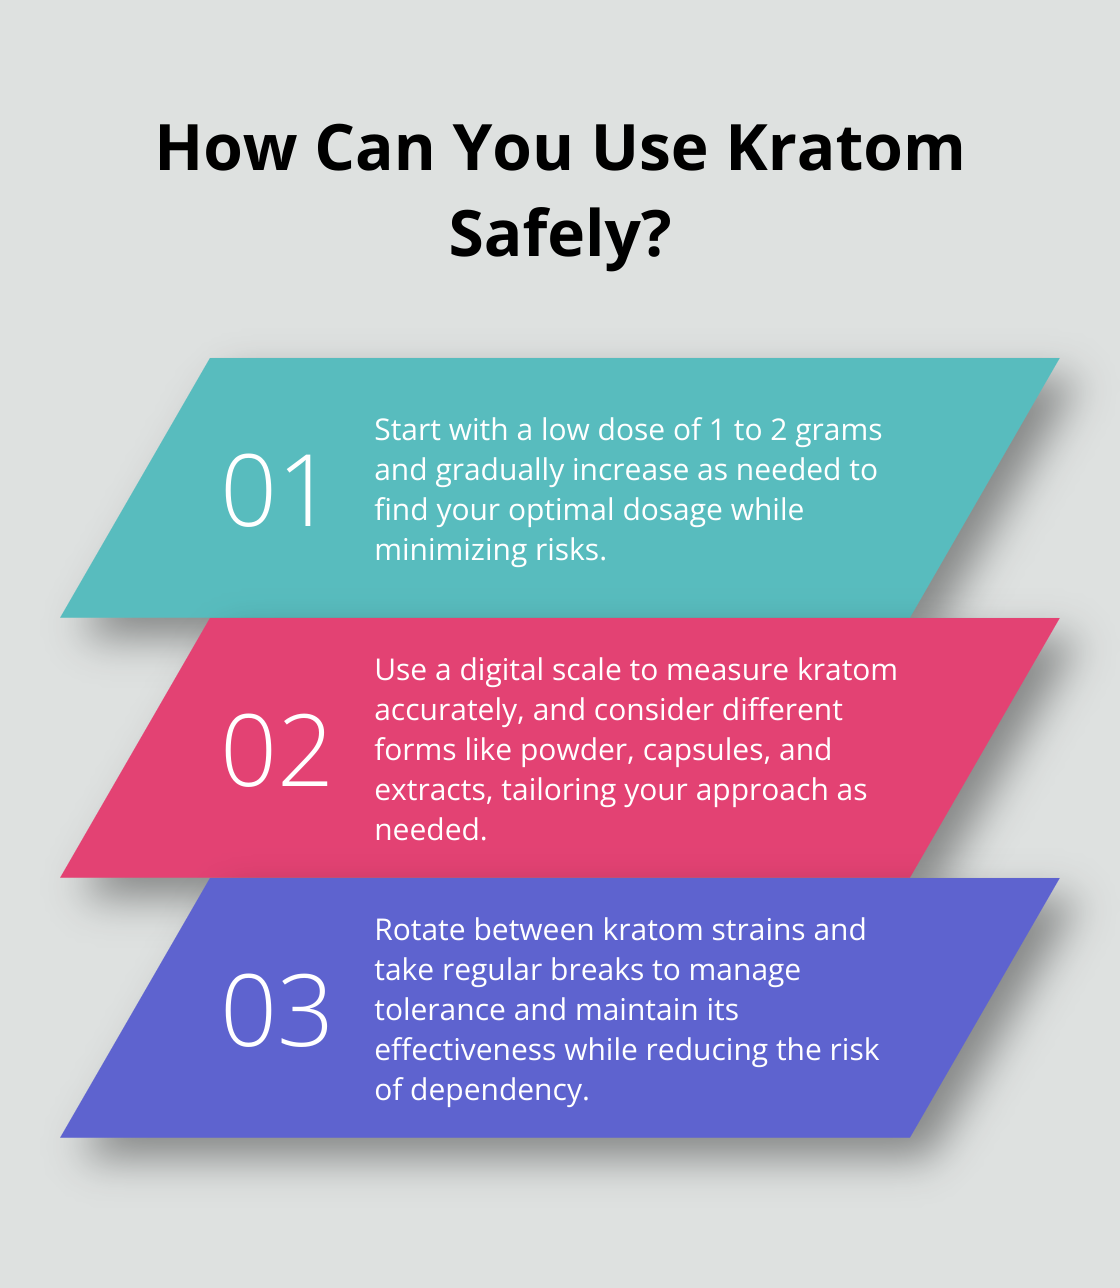 Fact - How Can You Use Kratom Safely?